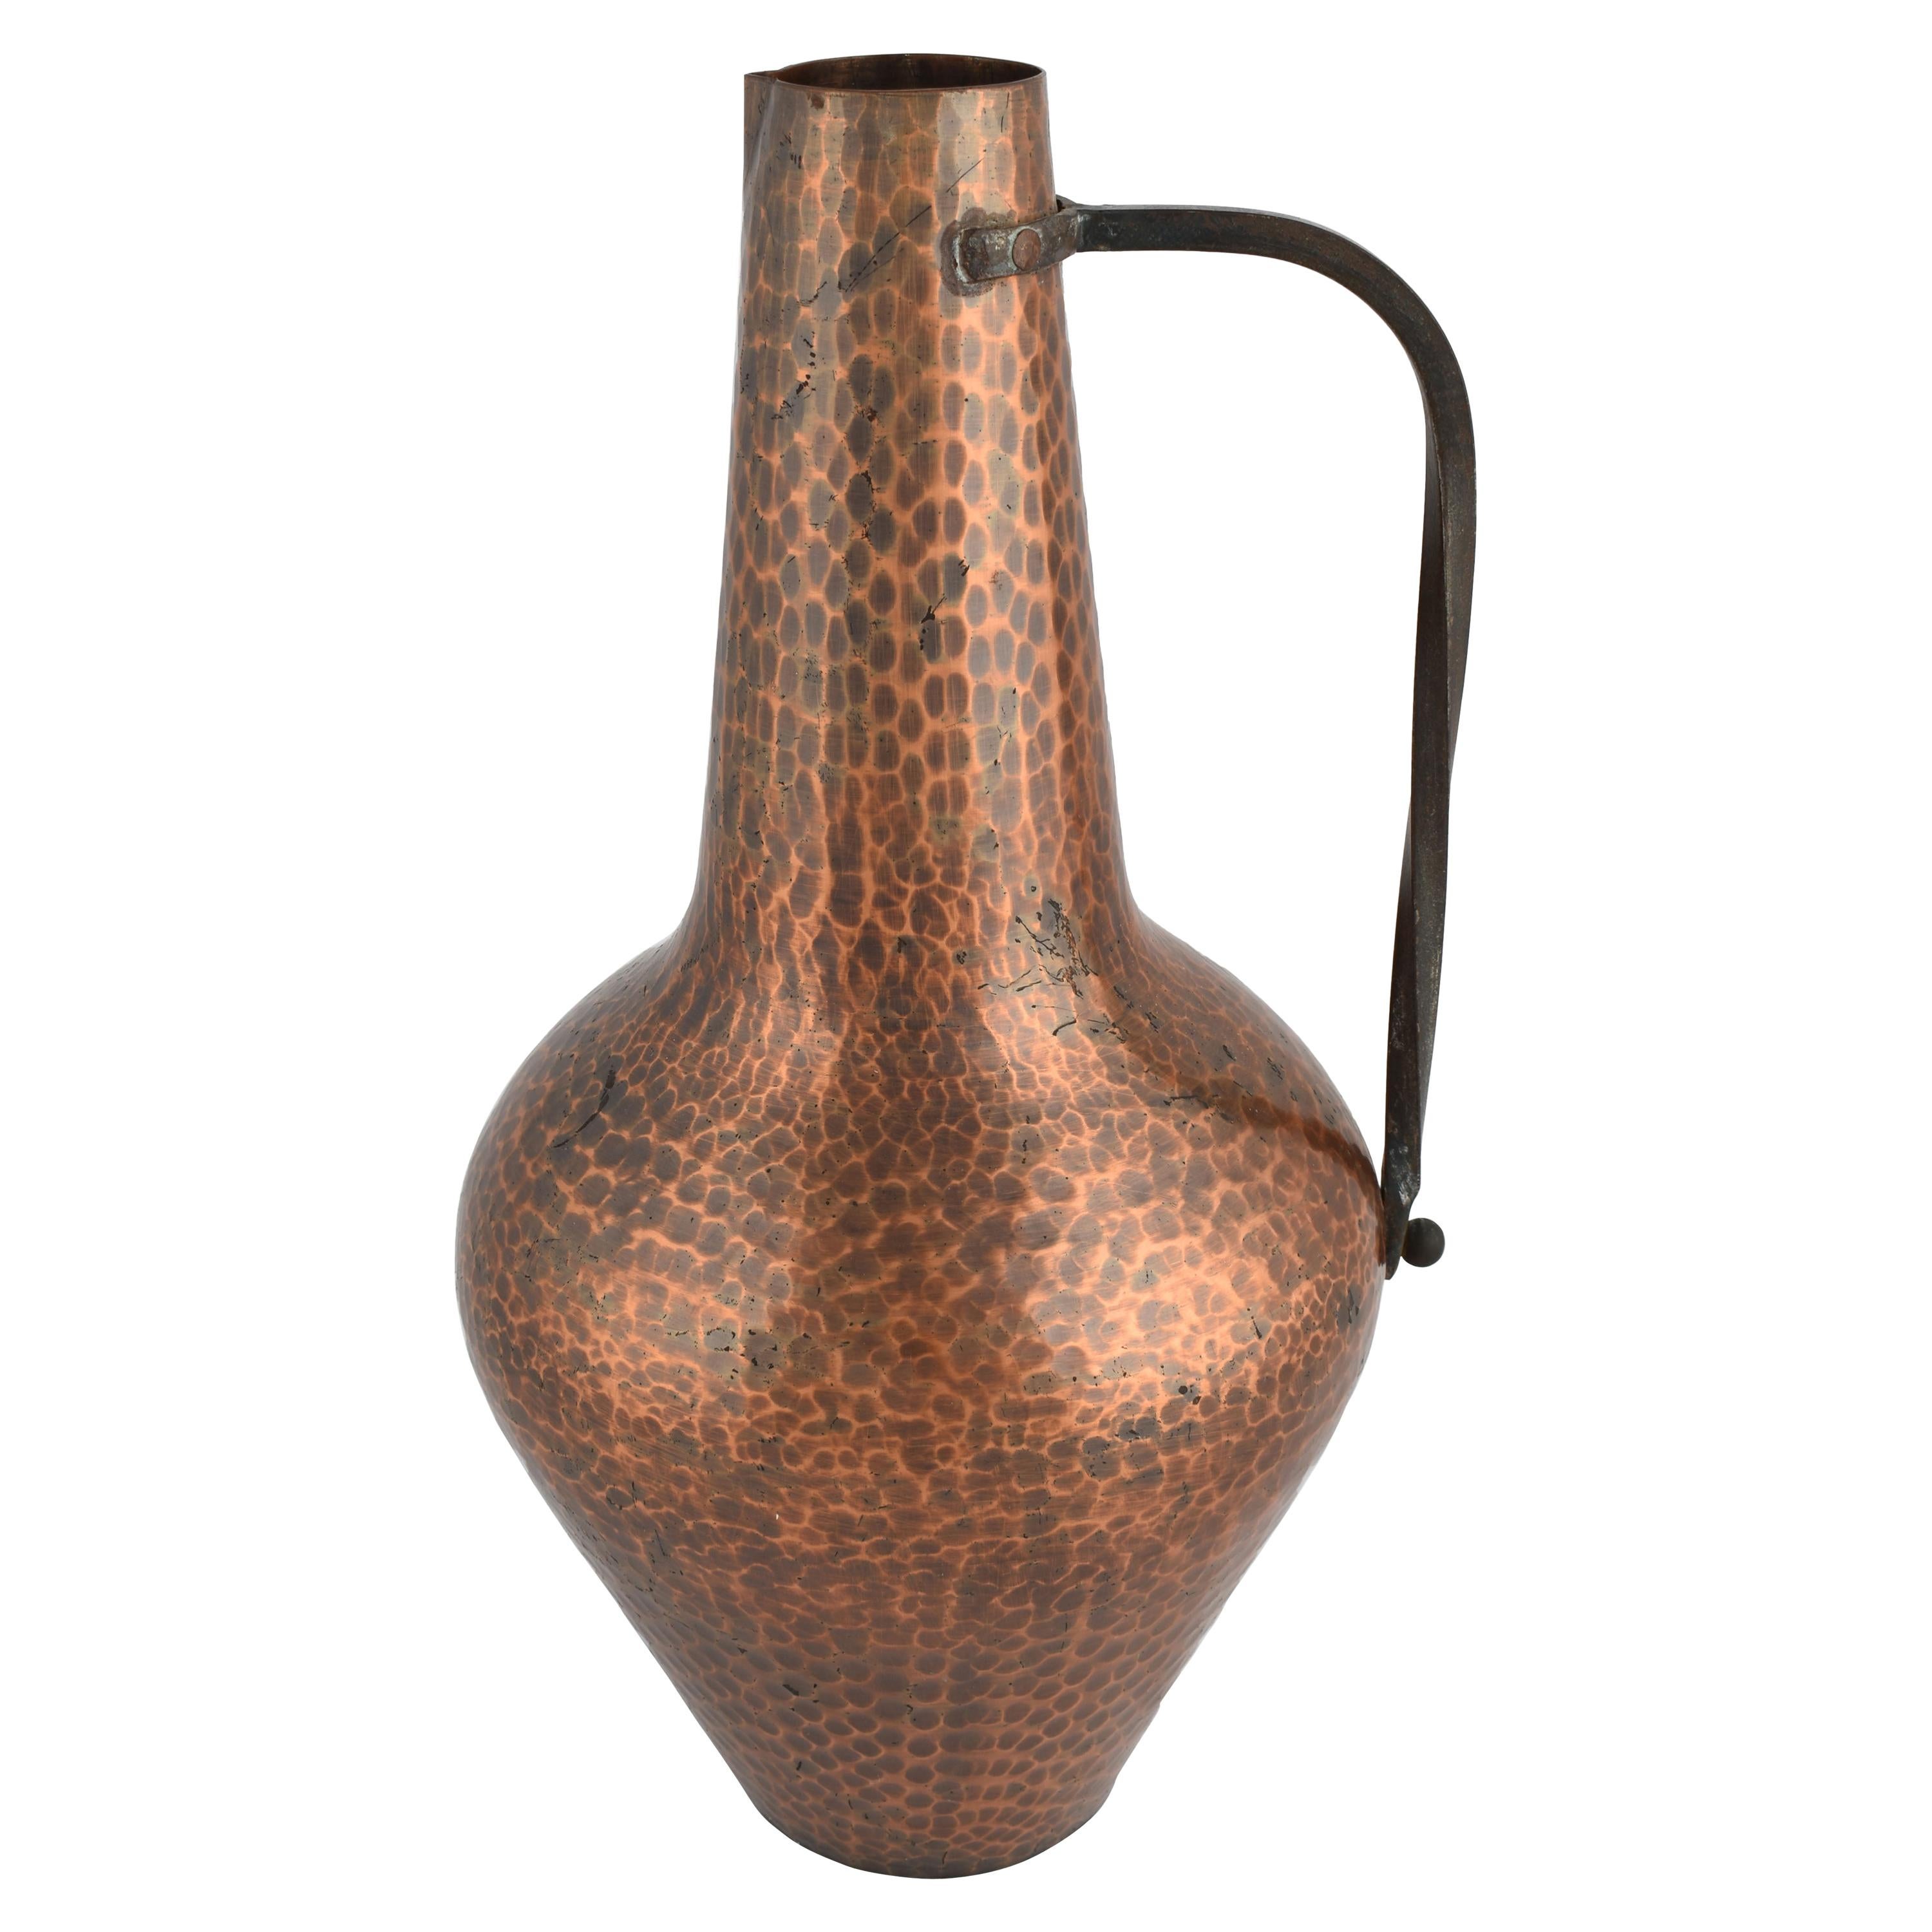 Vintage Copper Pitcher with Handle, Germany, 1950s